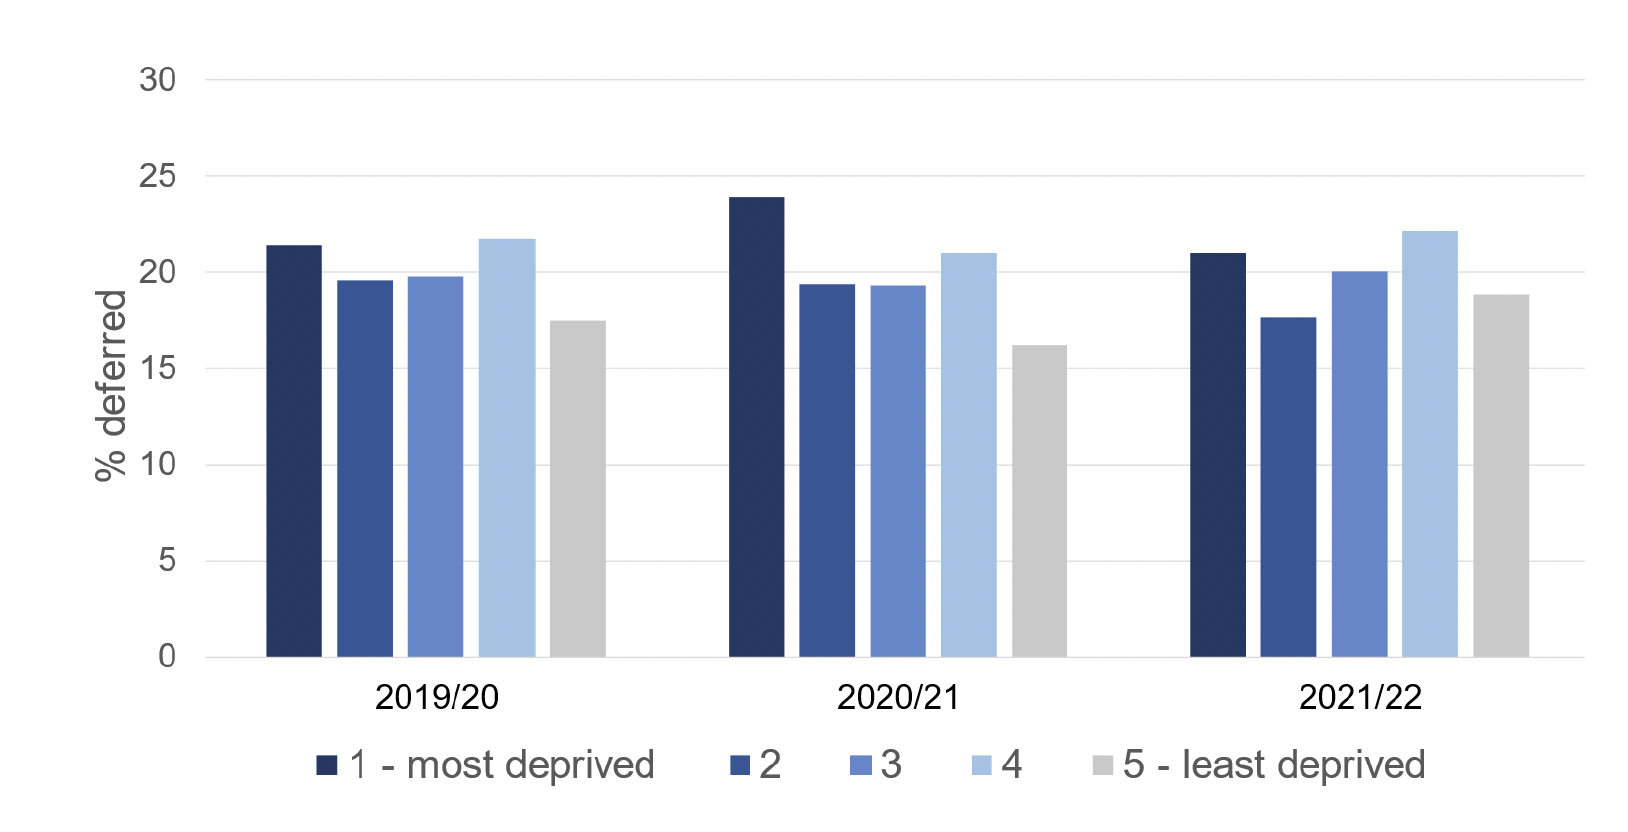 Figure v. is a bar chart of August-December deferral rates in Scotland from 2019/20 to 2021/22 according to local authority deprivation, SIMD quintiles. It shows August-December deferral rates have been high among those living in the most deprived quintile, quintile 1, and this increased in the first year of the pilot ,2020/21, but then dropped off again in the following year. This is national data and suggests that the pilot has not significantly changed the national picture. Local authority level data by SIMD quintile was not available.